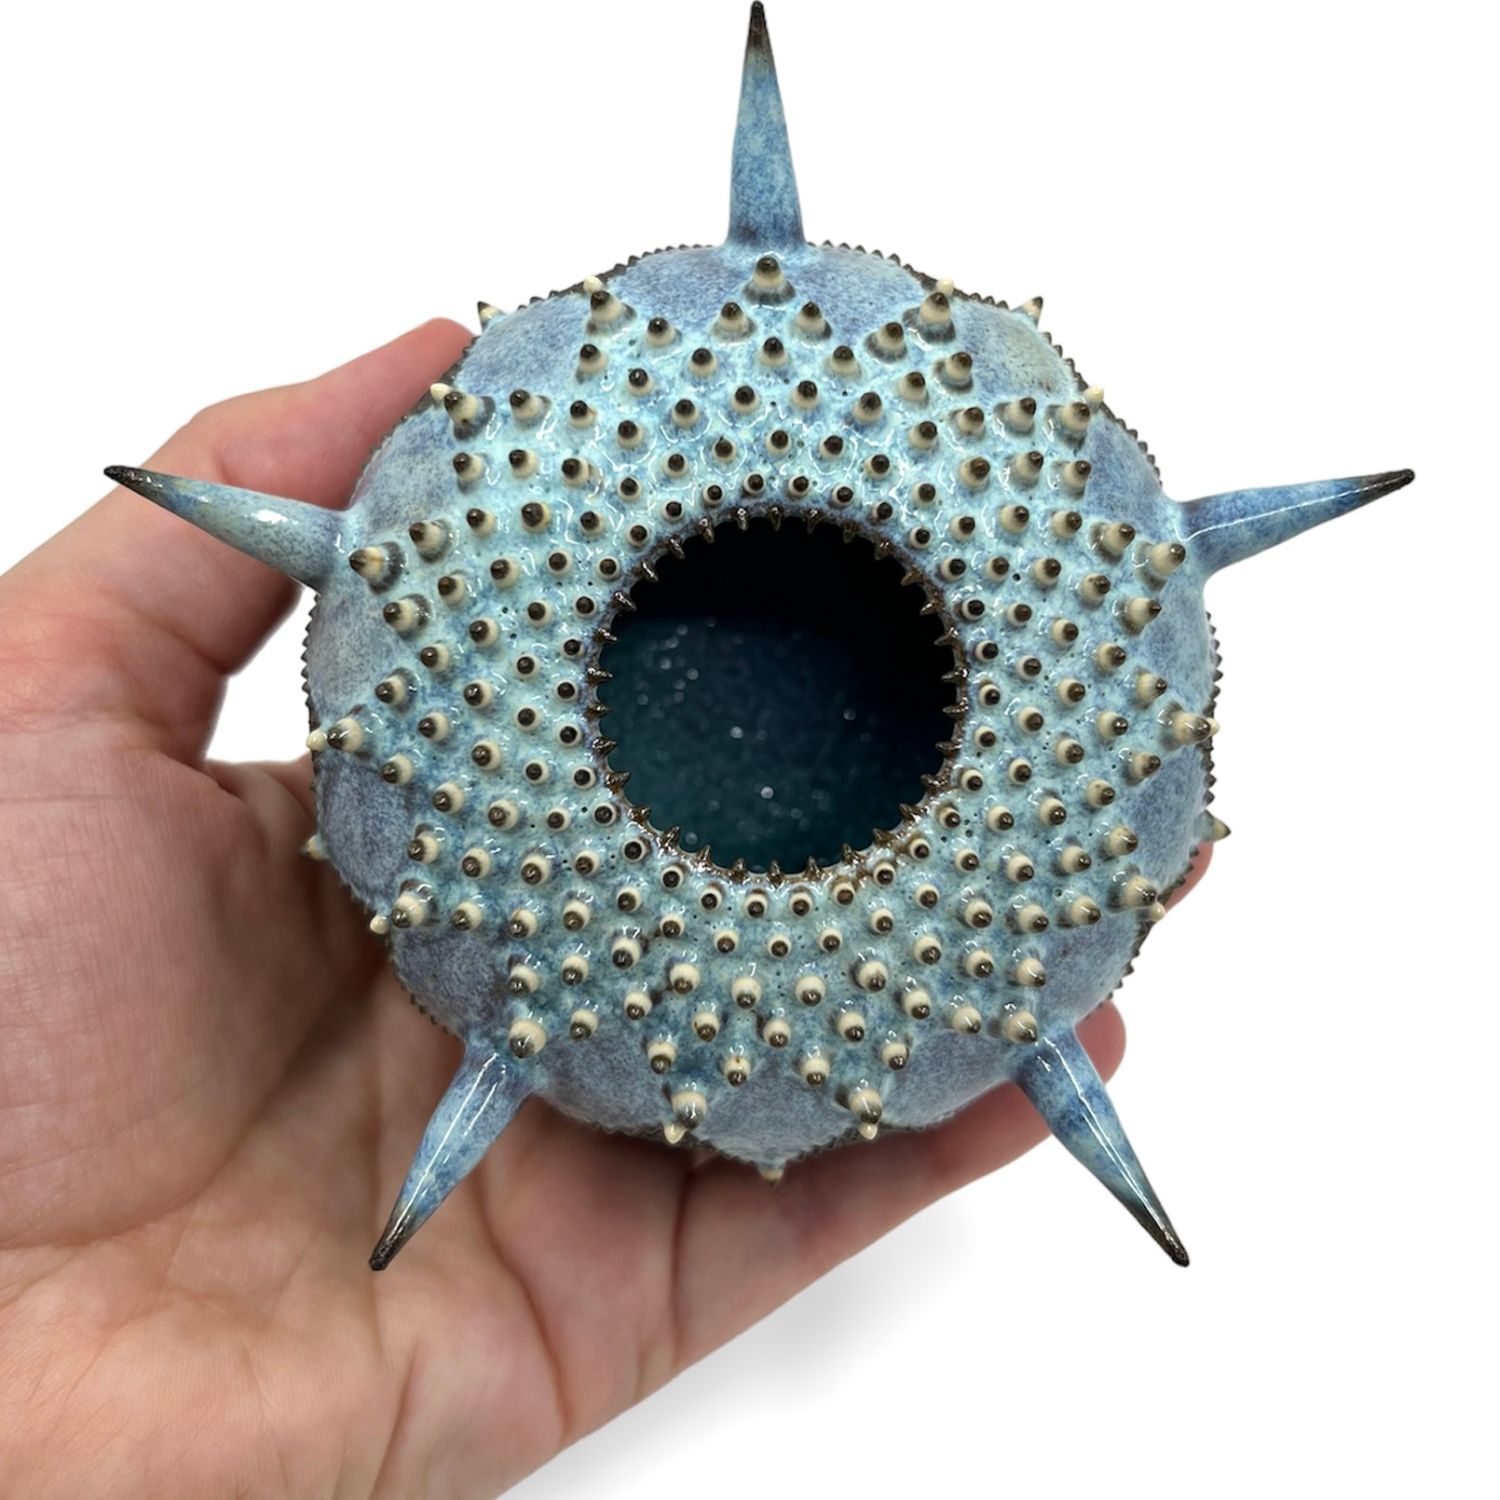 Zara Gardner: Black & Turquoise Urchin Sculpture with Spikes Product Image 2 of 4